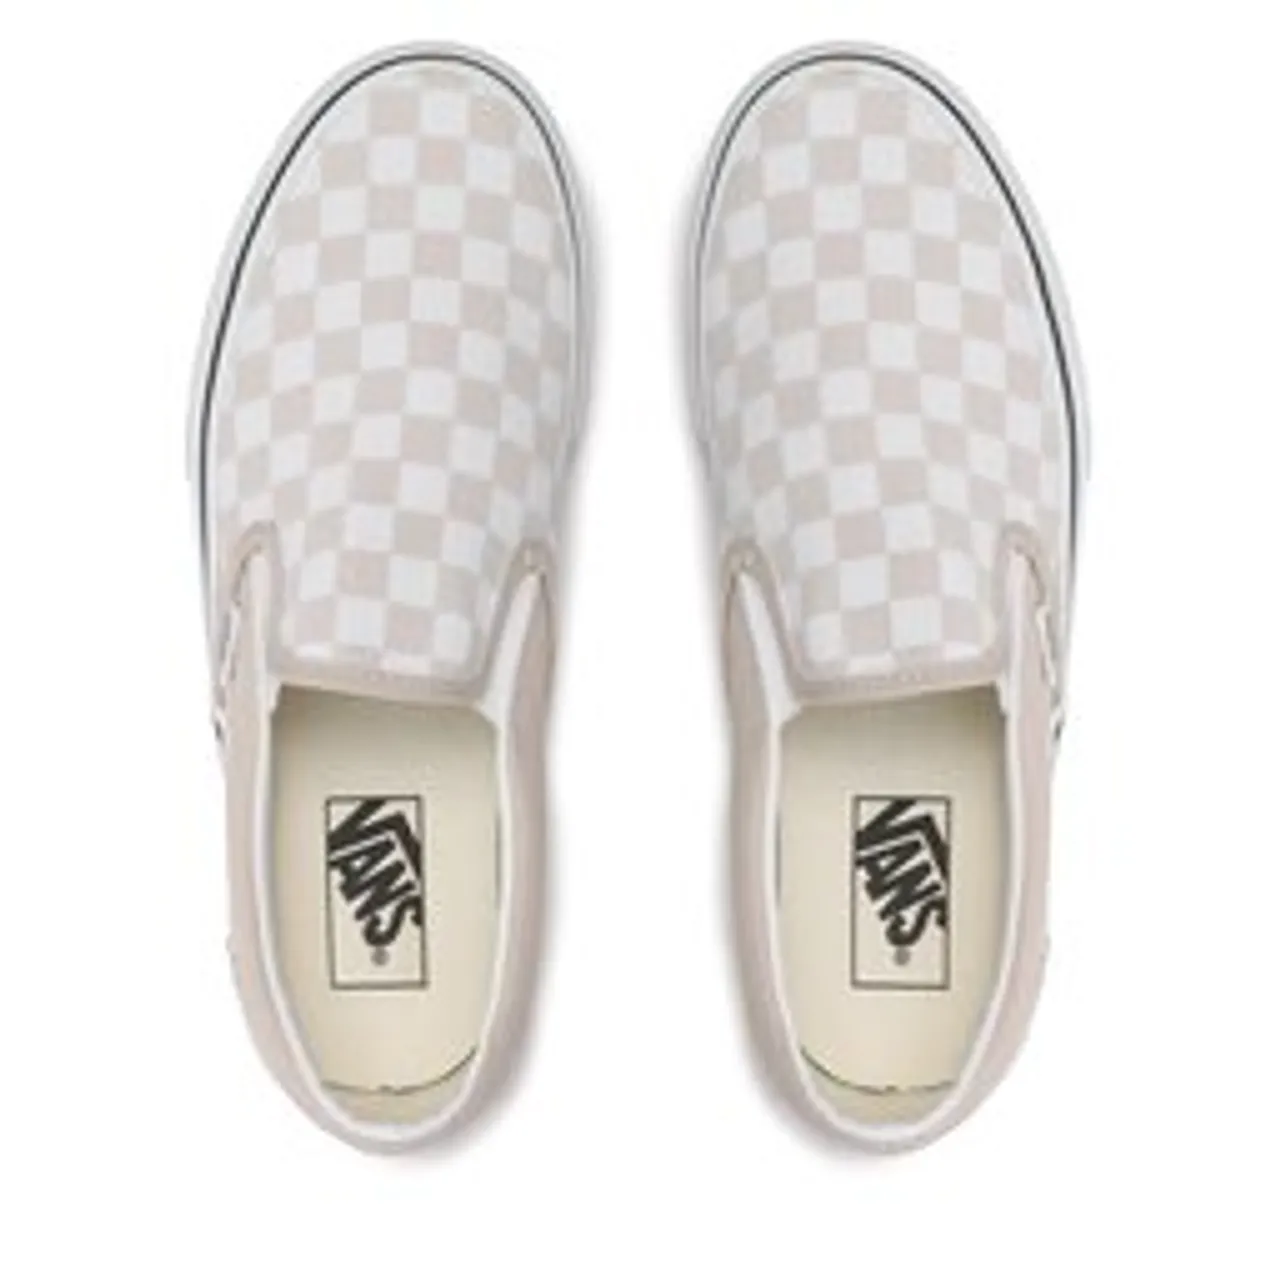 Sneakers aus Stoff Vans Classic Slip-O VN0A7Q5DBLL1 Color Theory Checkerboard